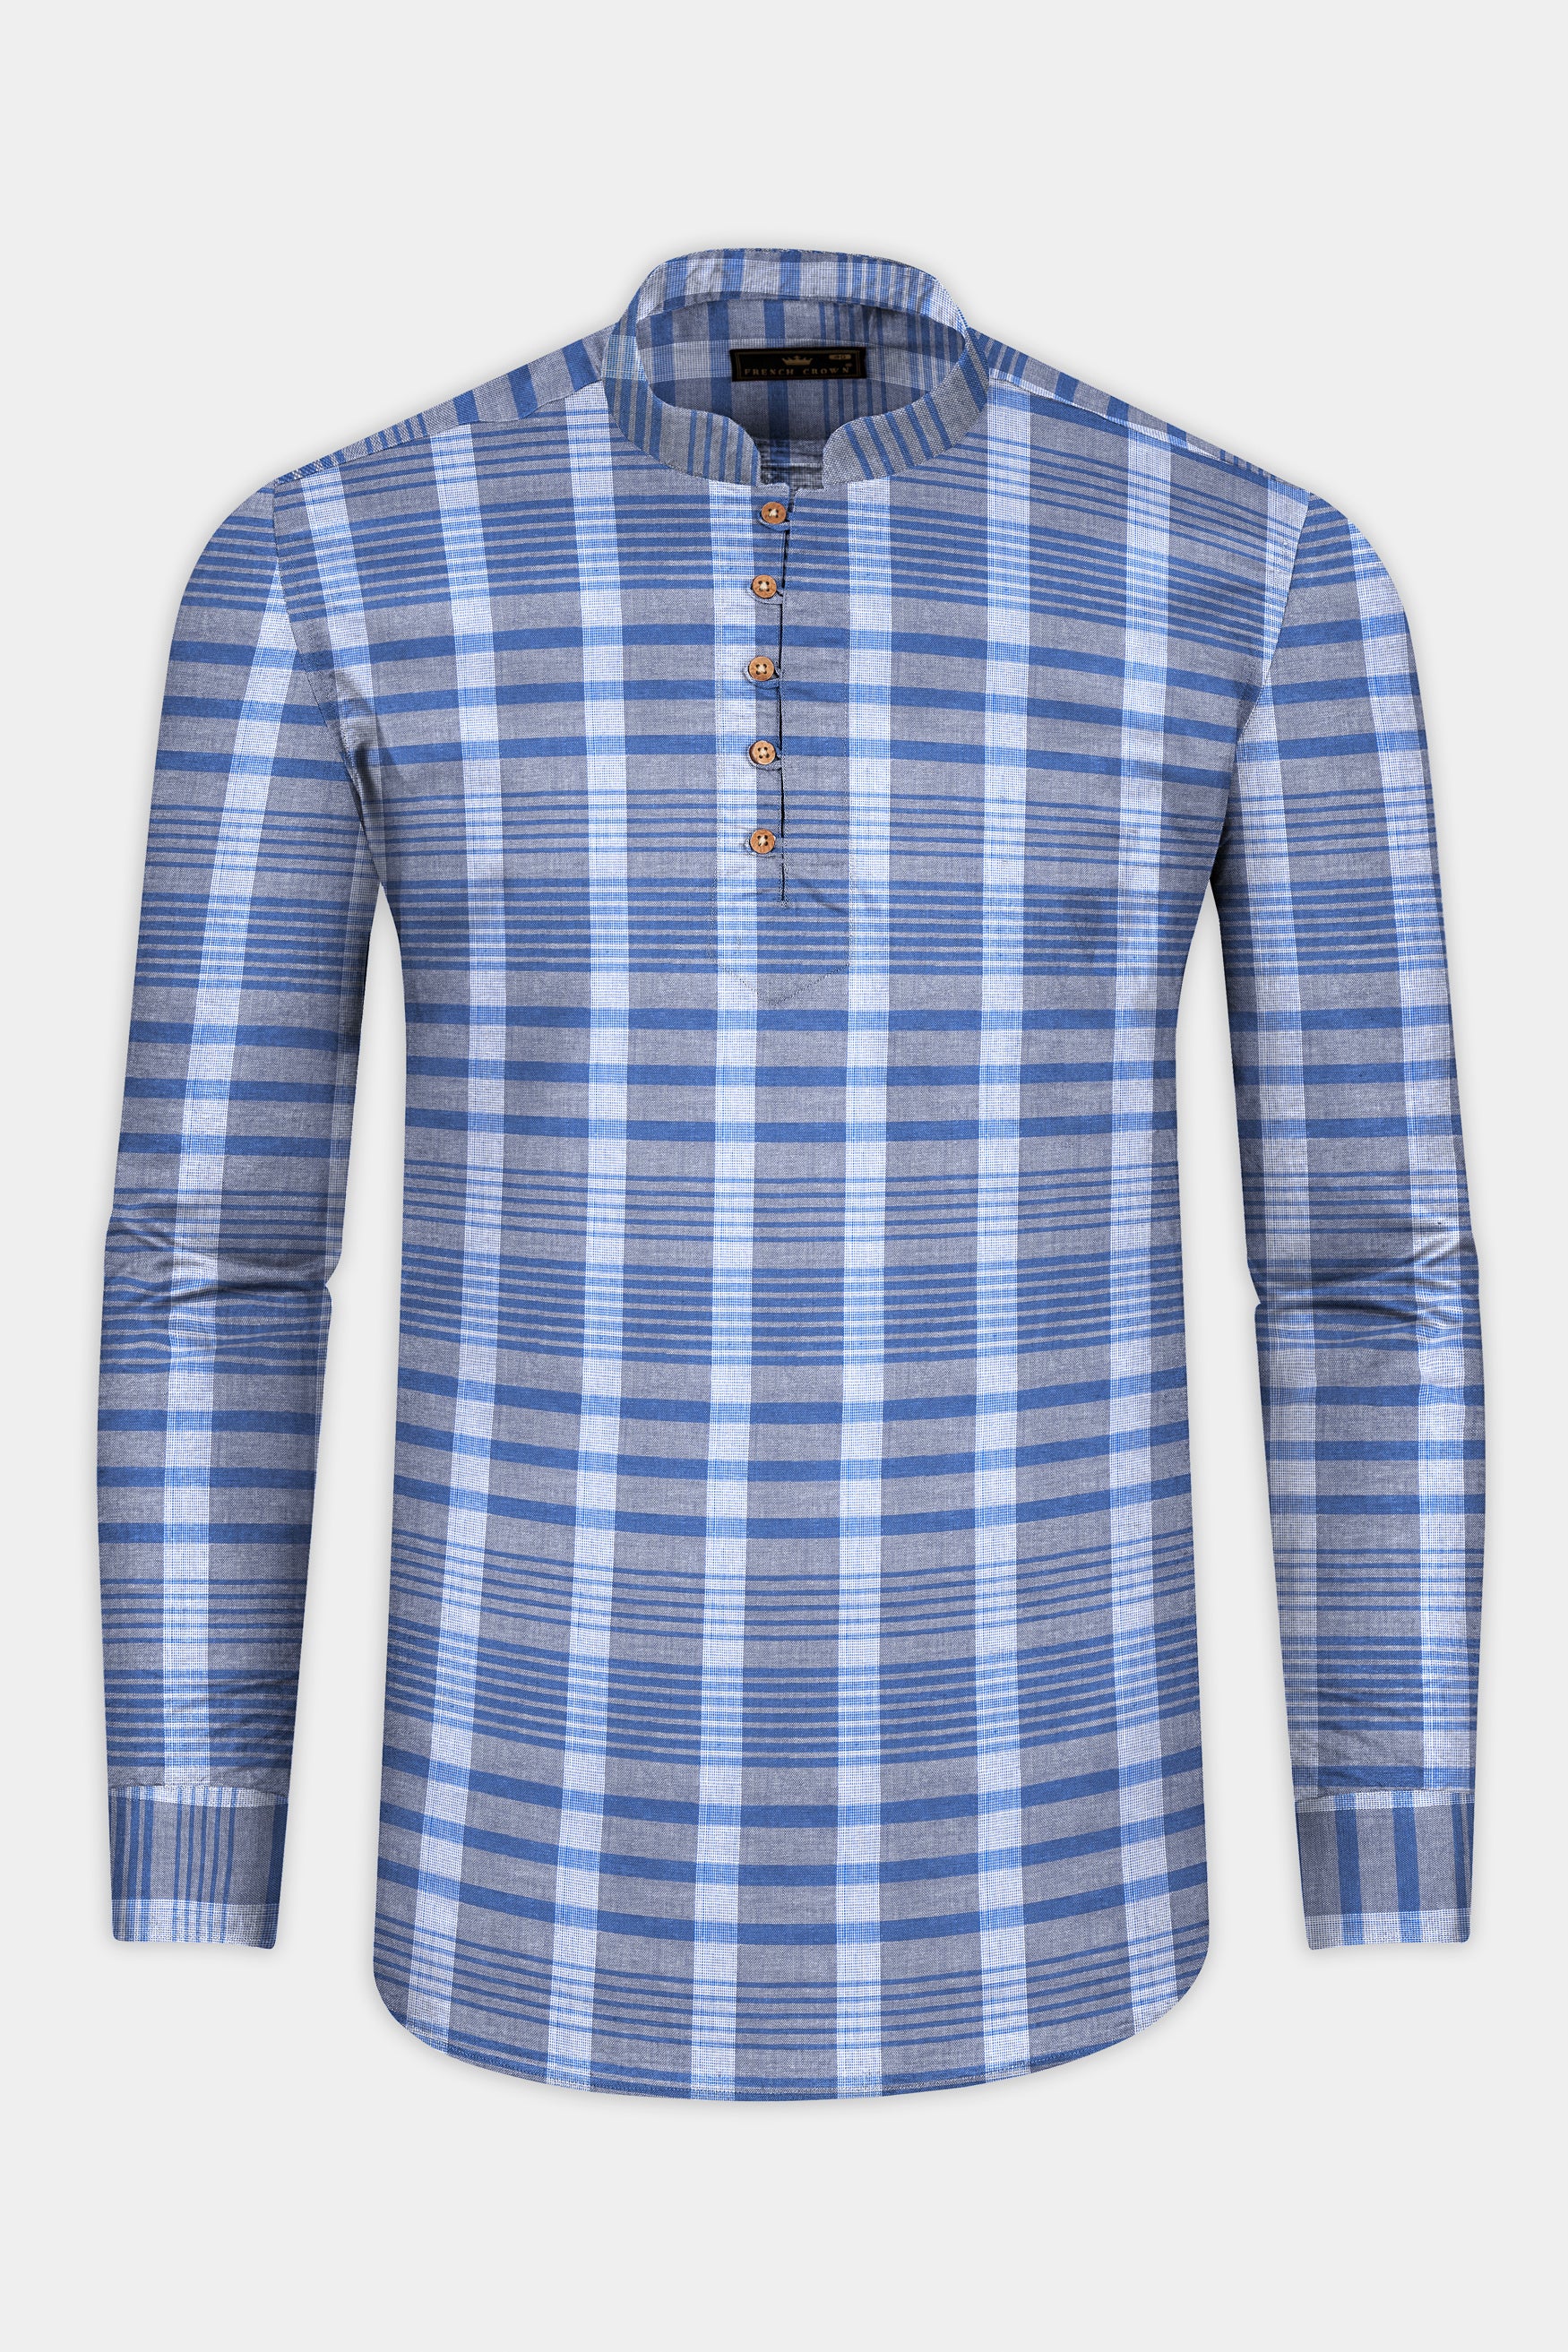 Tufts Blue and Cadet blue Plaid Chambray Textured Premium Cotton Shirt